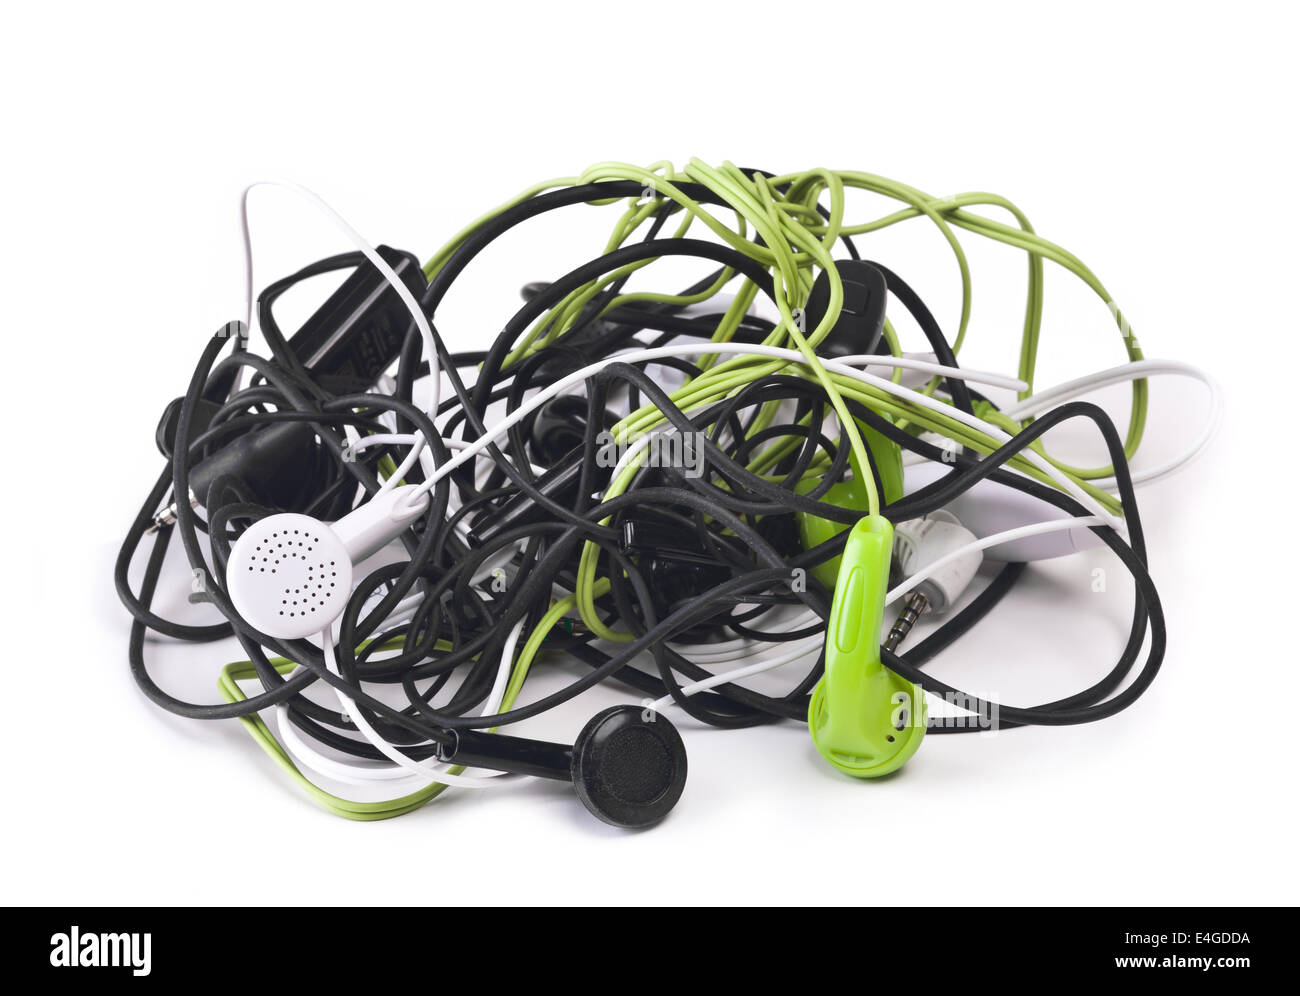 Twisted headphones, of different colors, on white background. Stock Photo